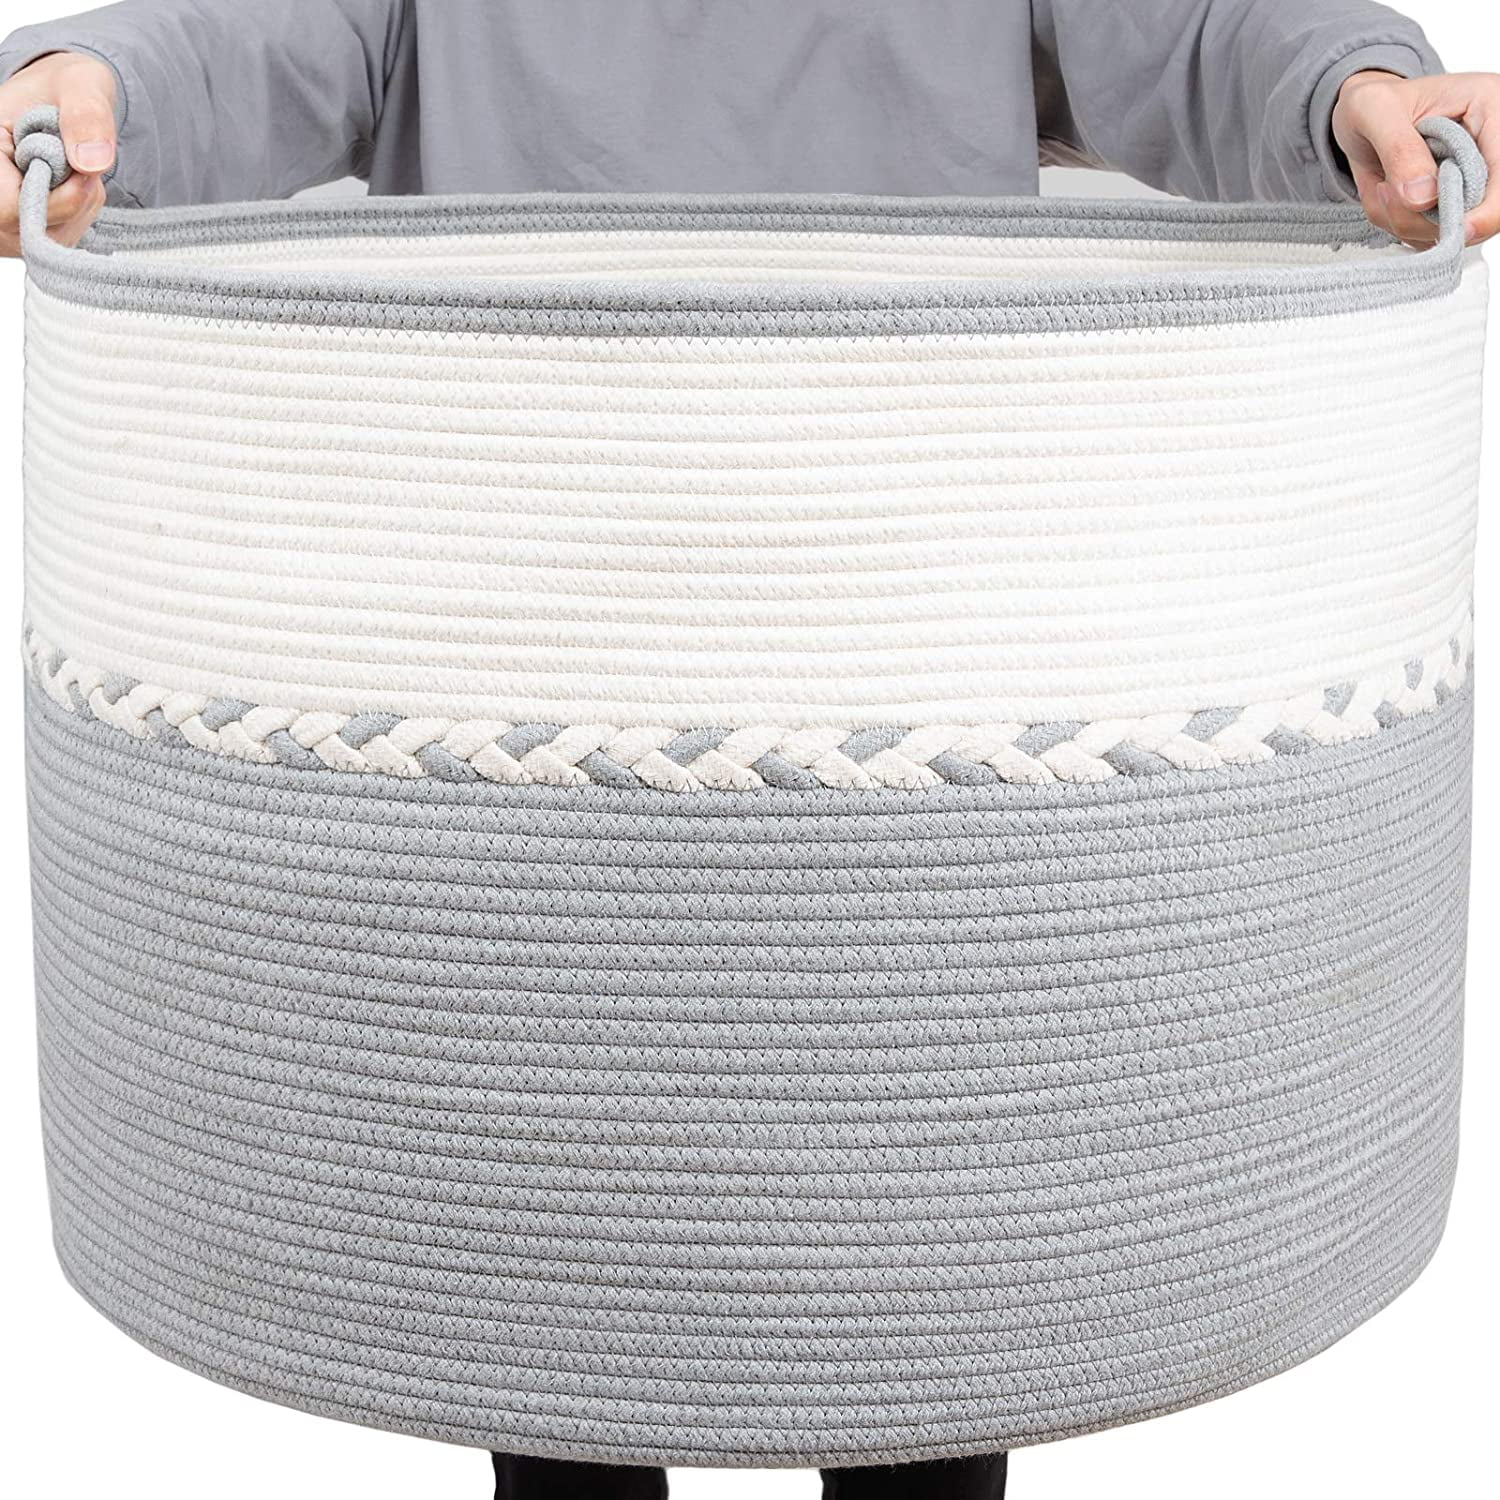 for Toys Blanket in Living Room Toy Storage Bin Baby Nursery White/Grey Cotton Rope Storage Baskets Woven Laundry Hamper with Cover 26 x 20 Tall Extra Large Storage Basket with Lid 